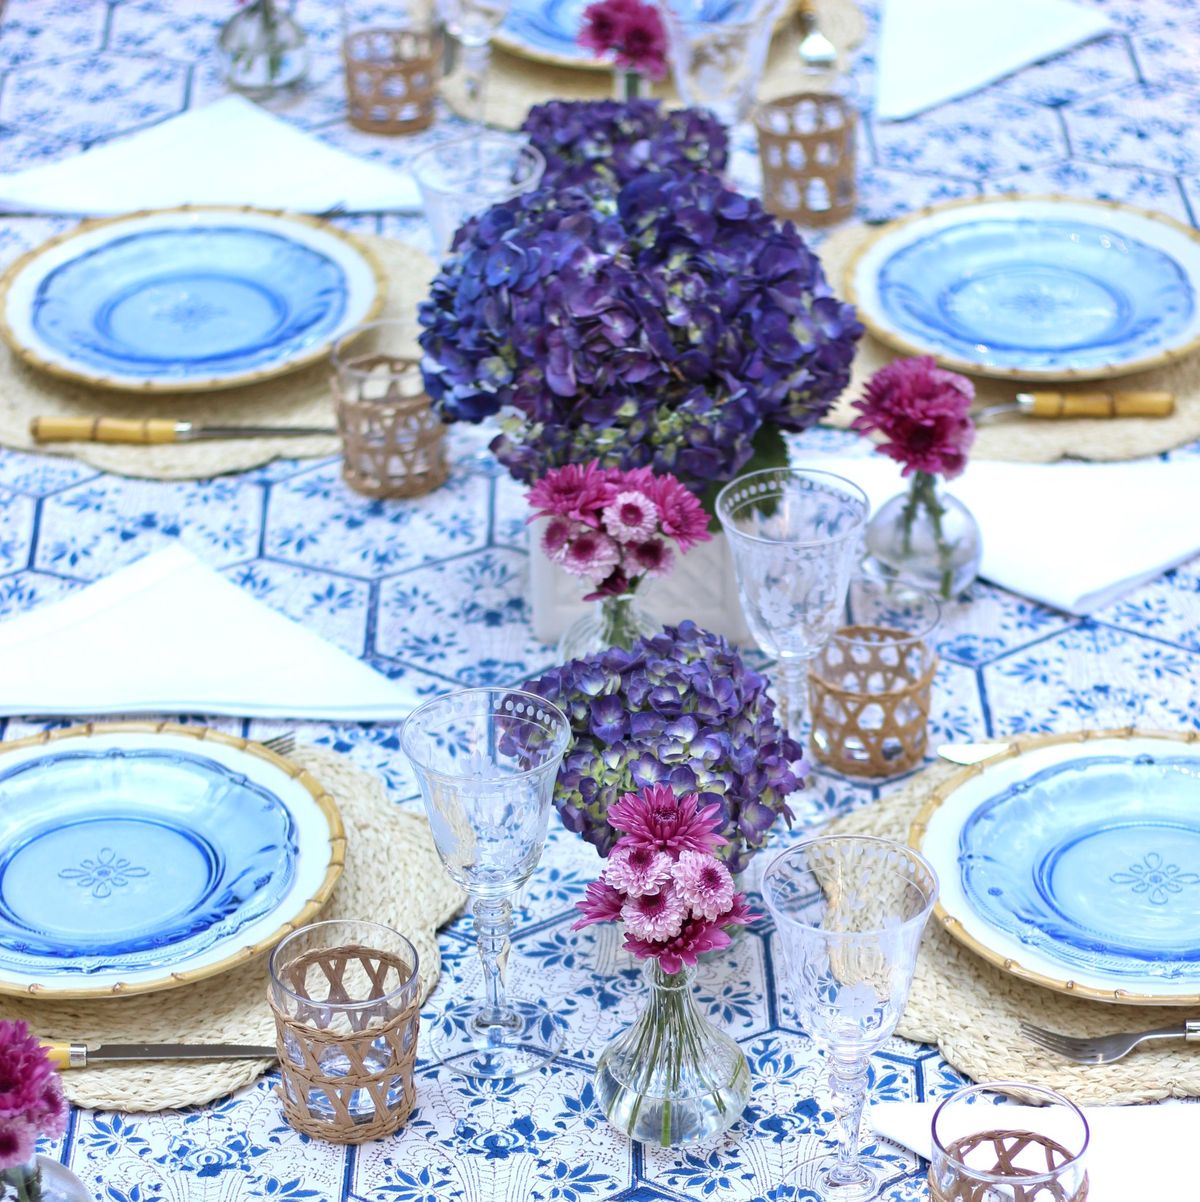 Set The Table With AERIN's New Line of Tabletop Accessories